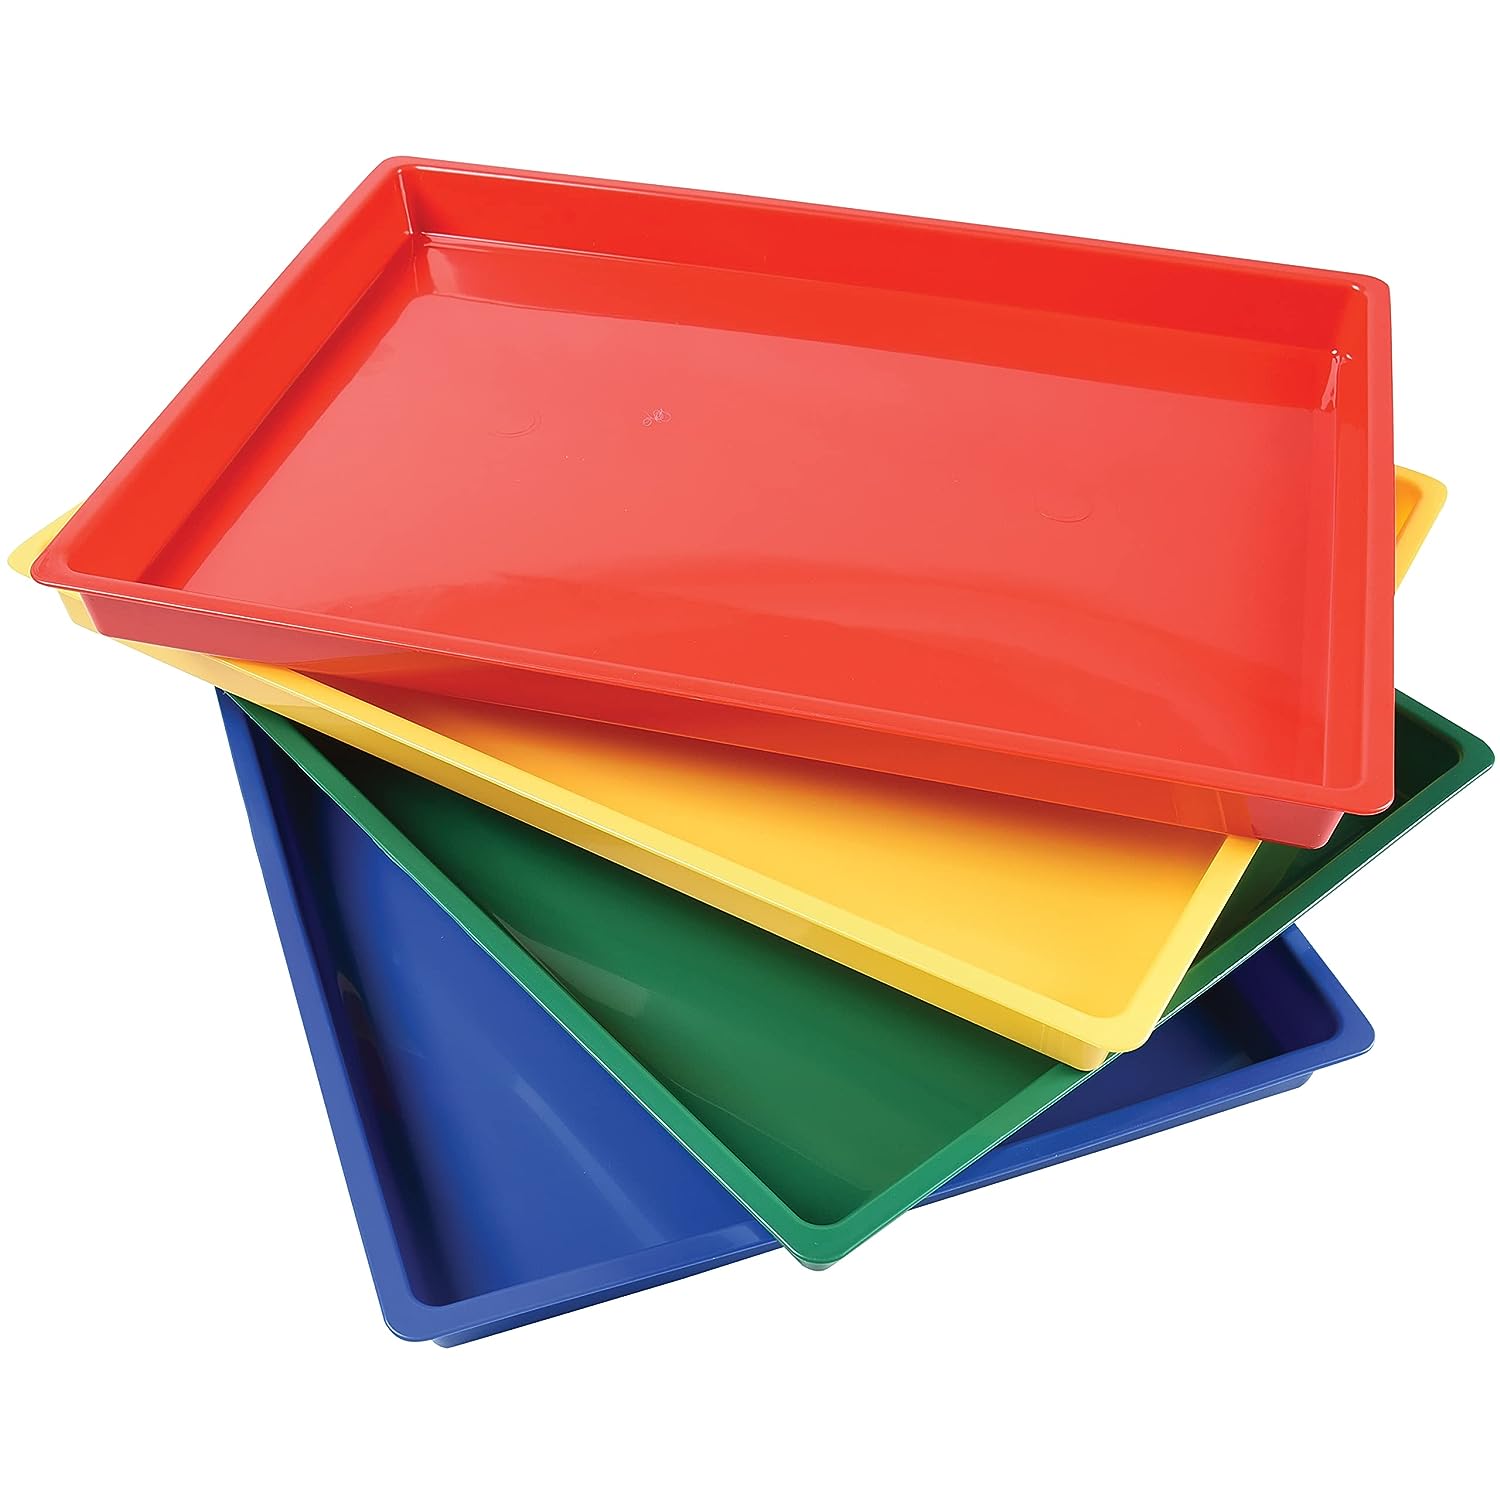 Easy-Clean Craft Trays - Set of 4